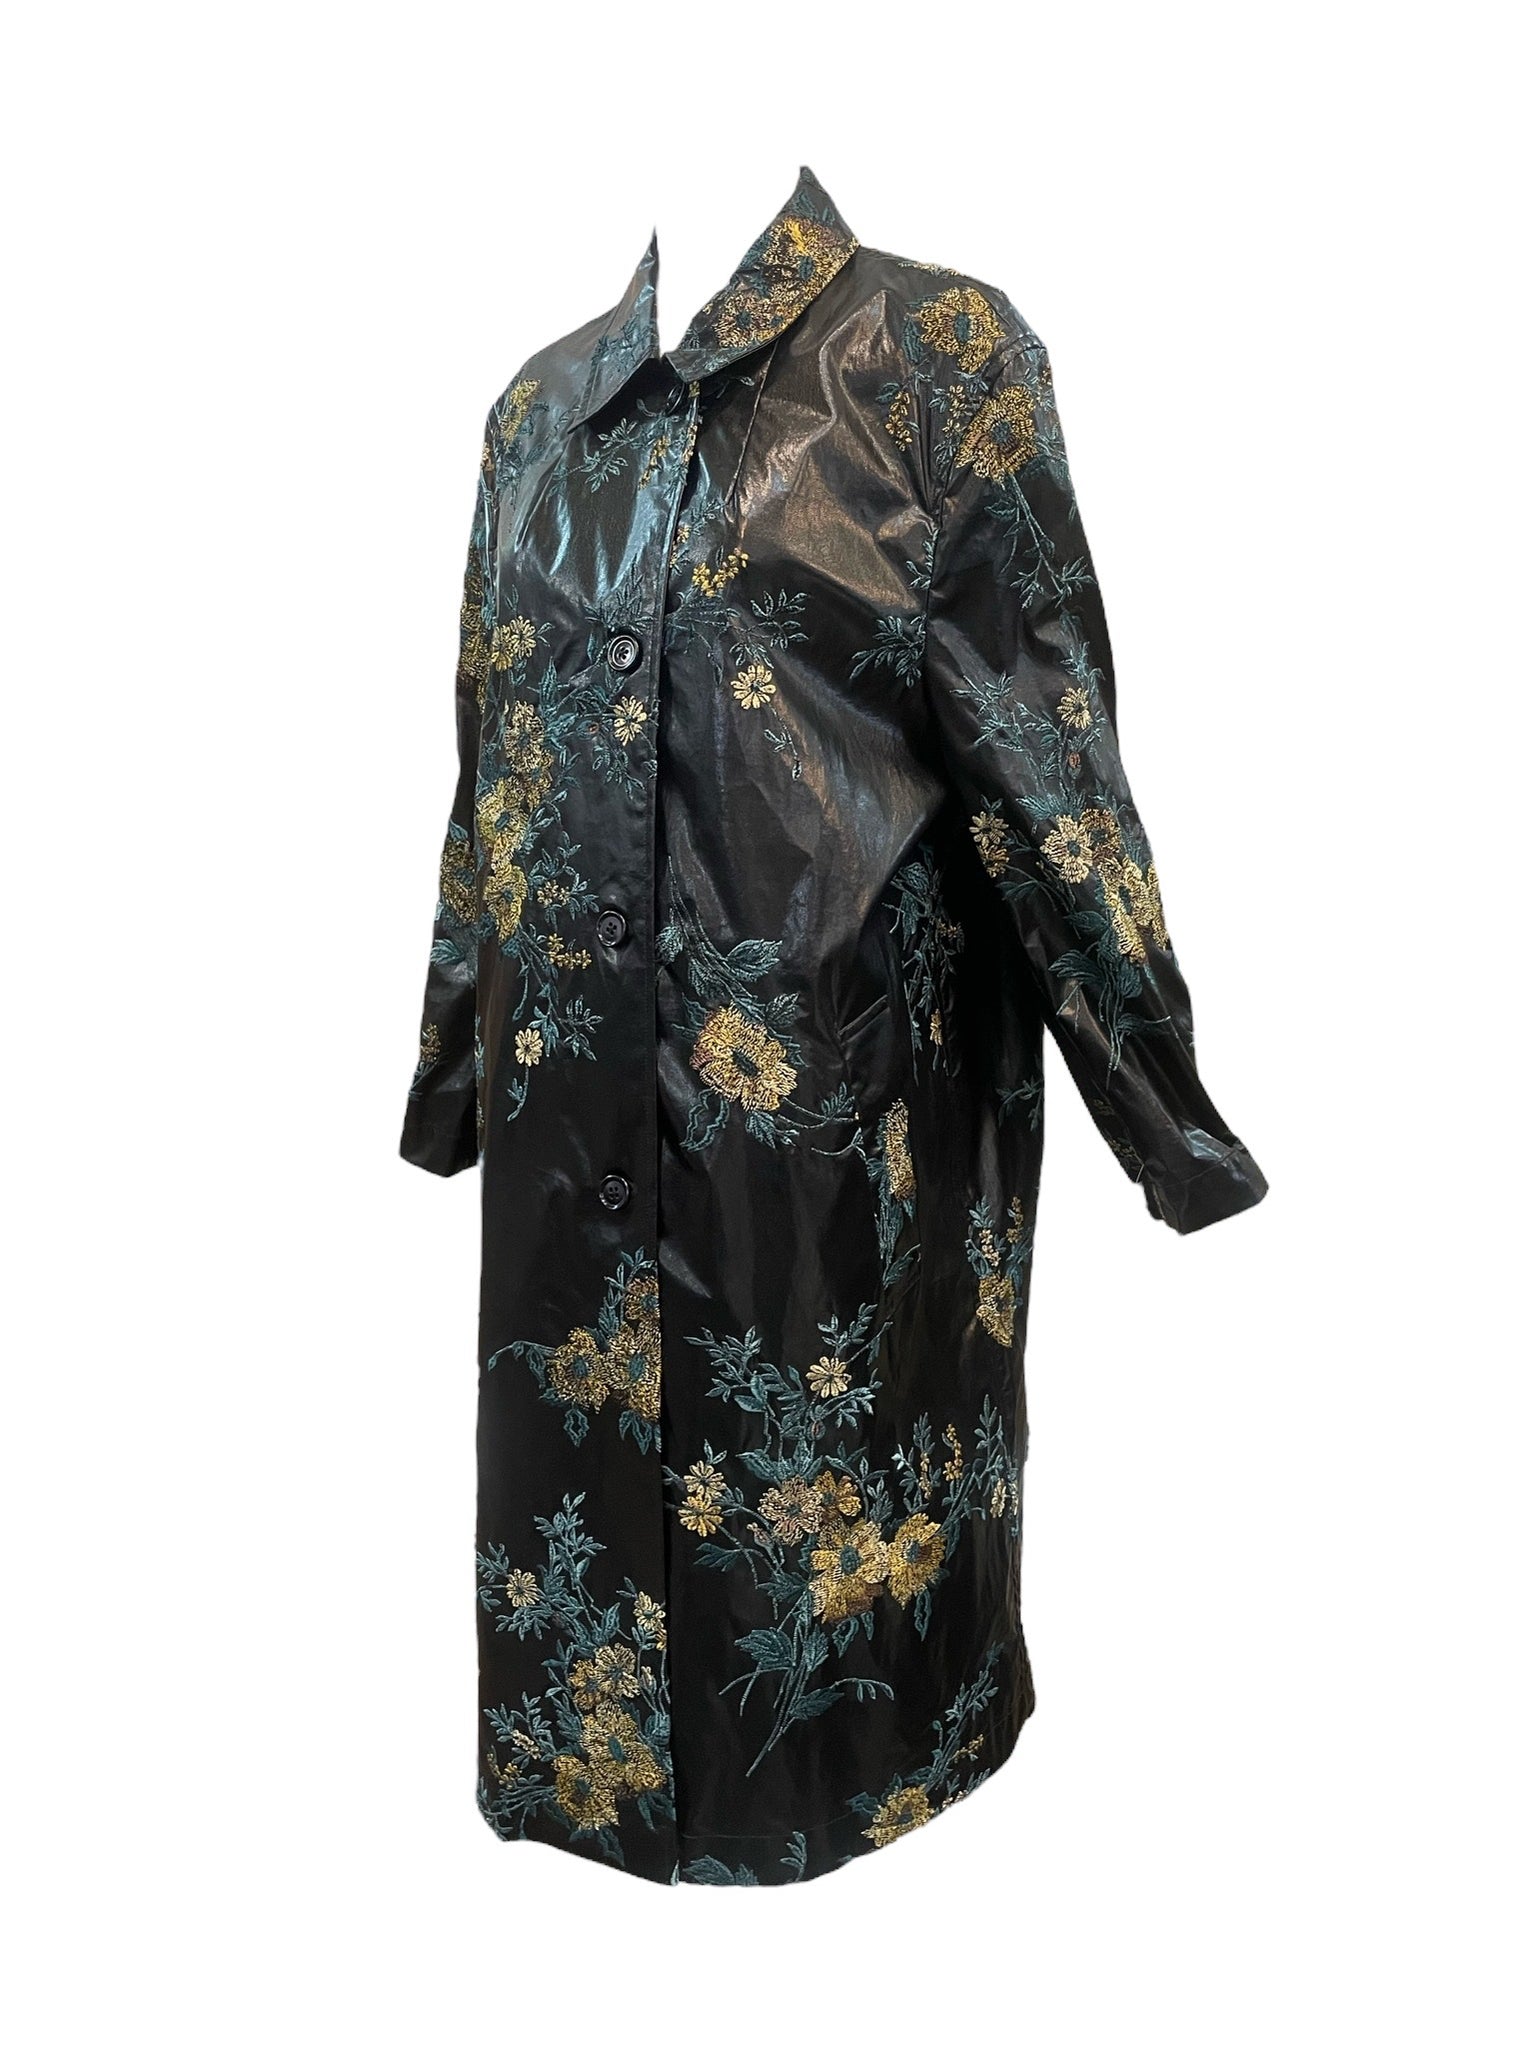 Dries van Noten Contemporary Floral Embroidered Rain Coat ANGLE 2 of 5